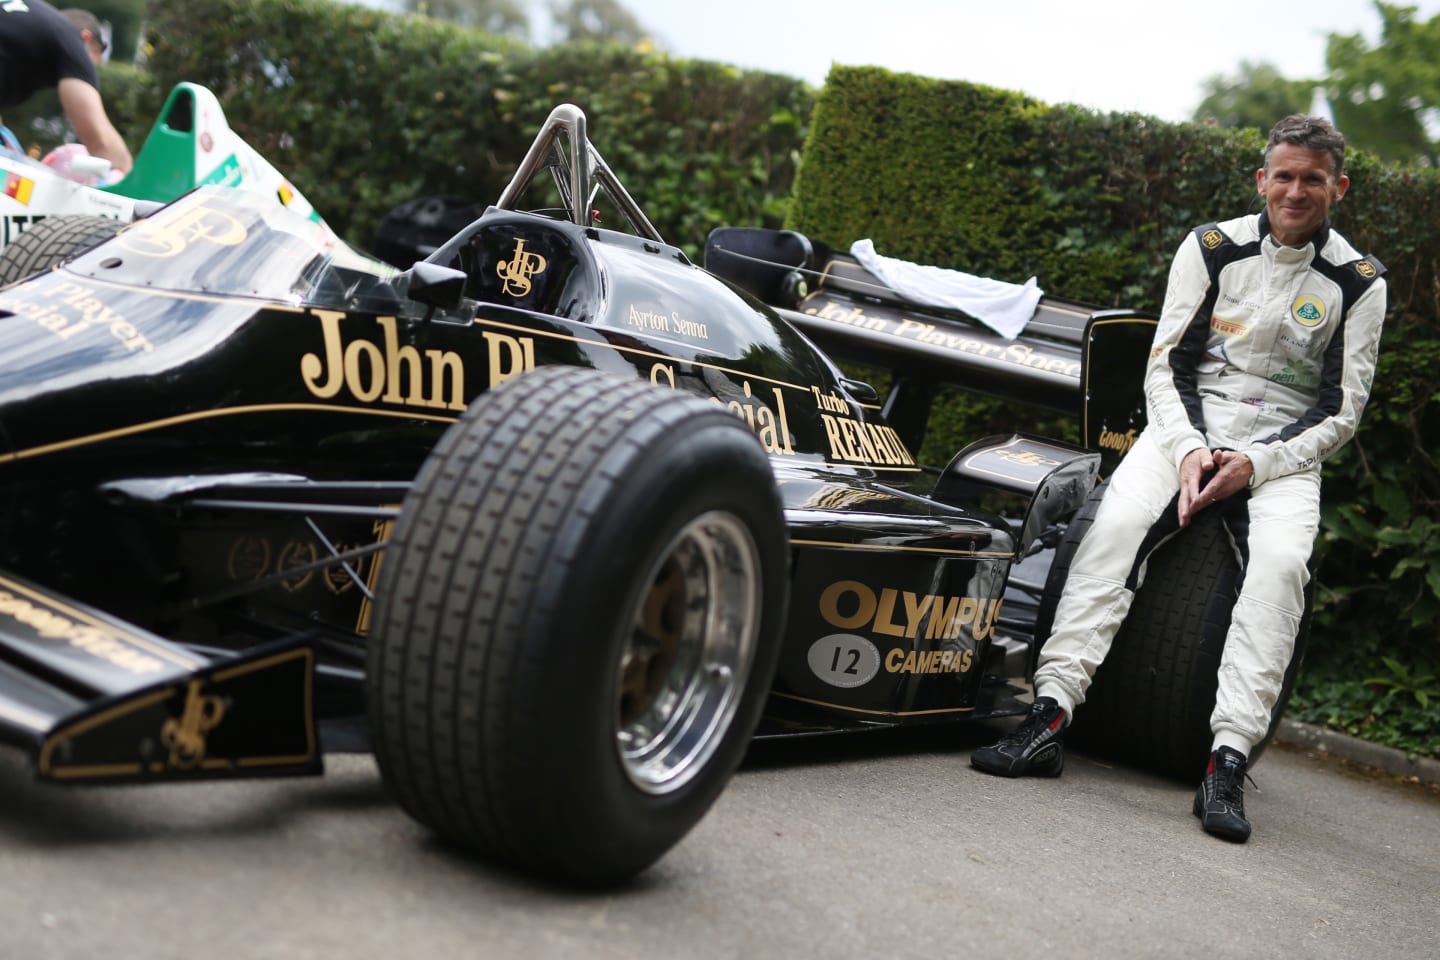 www.sutton-images.com Lee Mowle (GBR) Lotus Renault 97T at Goodwood Festival of Speed, Goodwood, England, 30 June - 2 July 2017. © Sutton Images